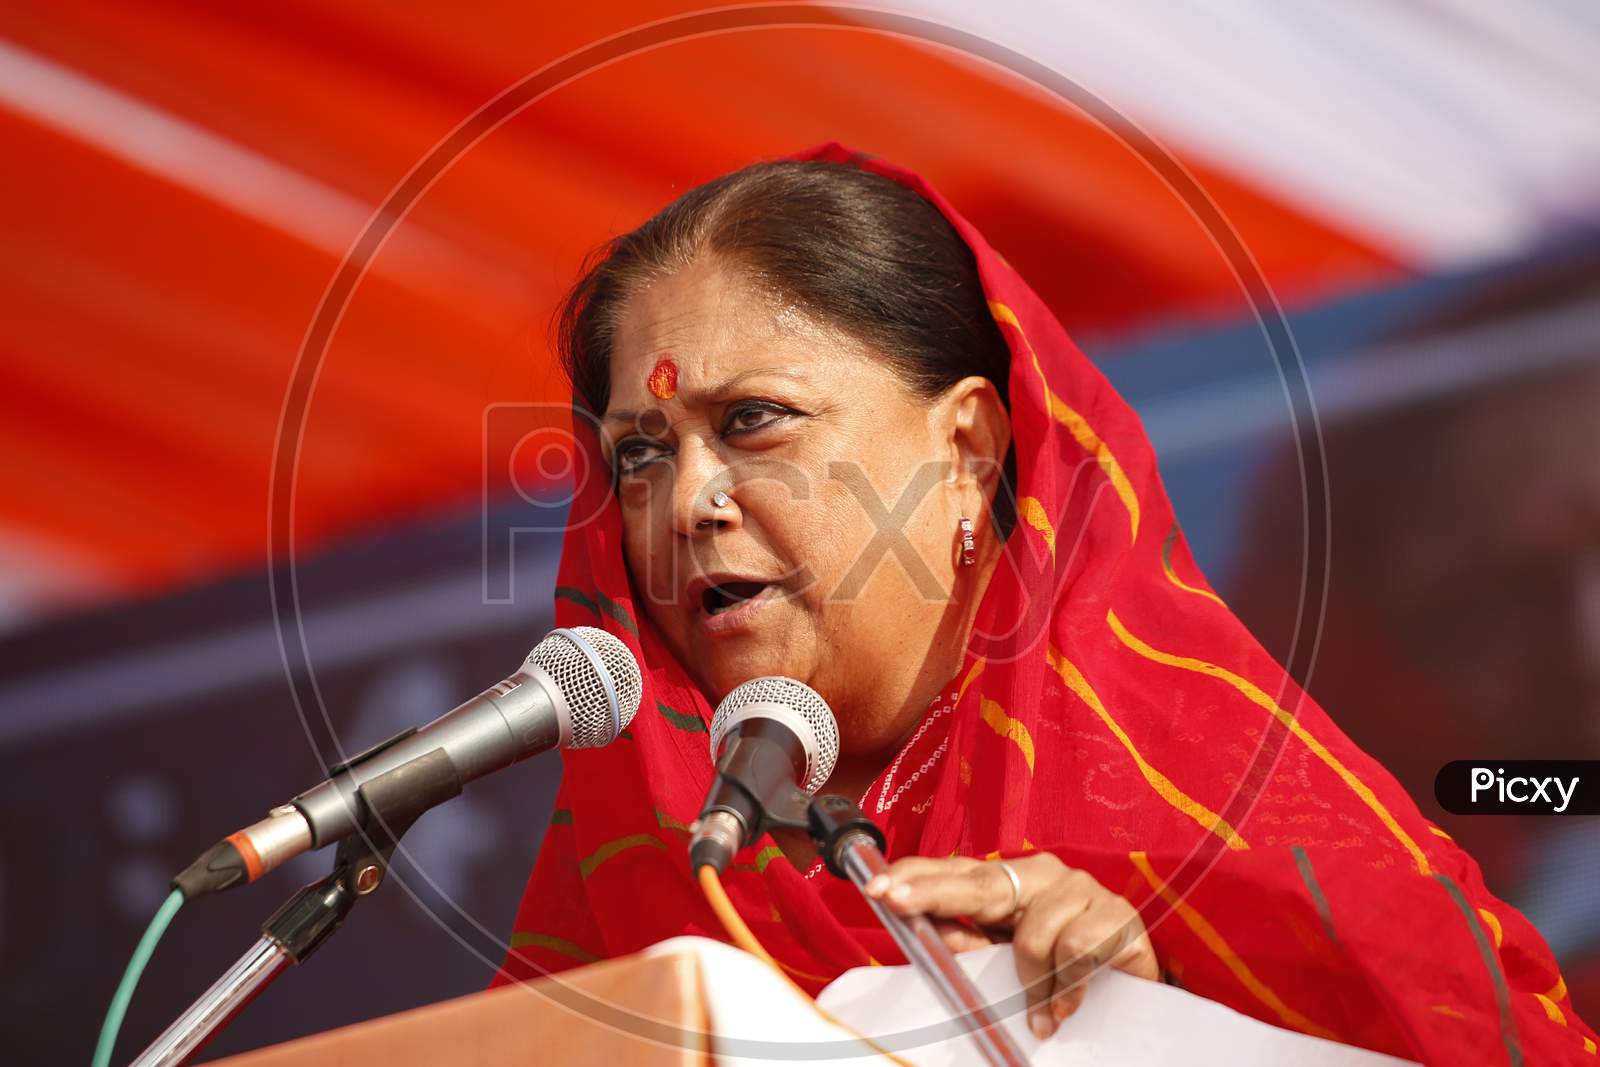 Vasundhara Raje, Former Chief Minister Of Rajasthan State And Current National Vice President Of Bhartiya Janta Party (Bjp) Addressing In A Public Event Before General Elections In Rajasthan, Bhilwara, December, 2018.